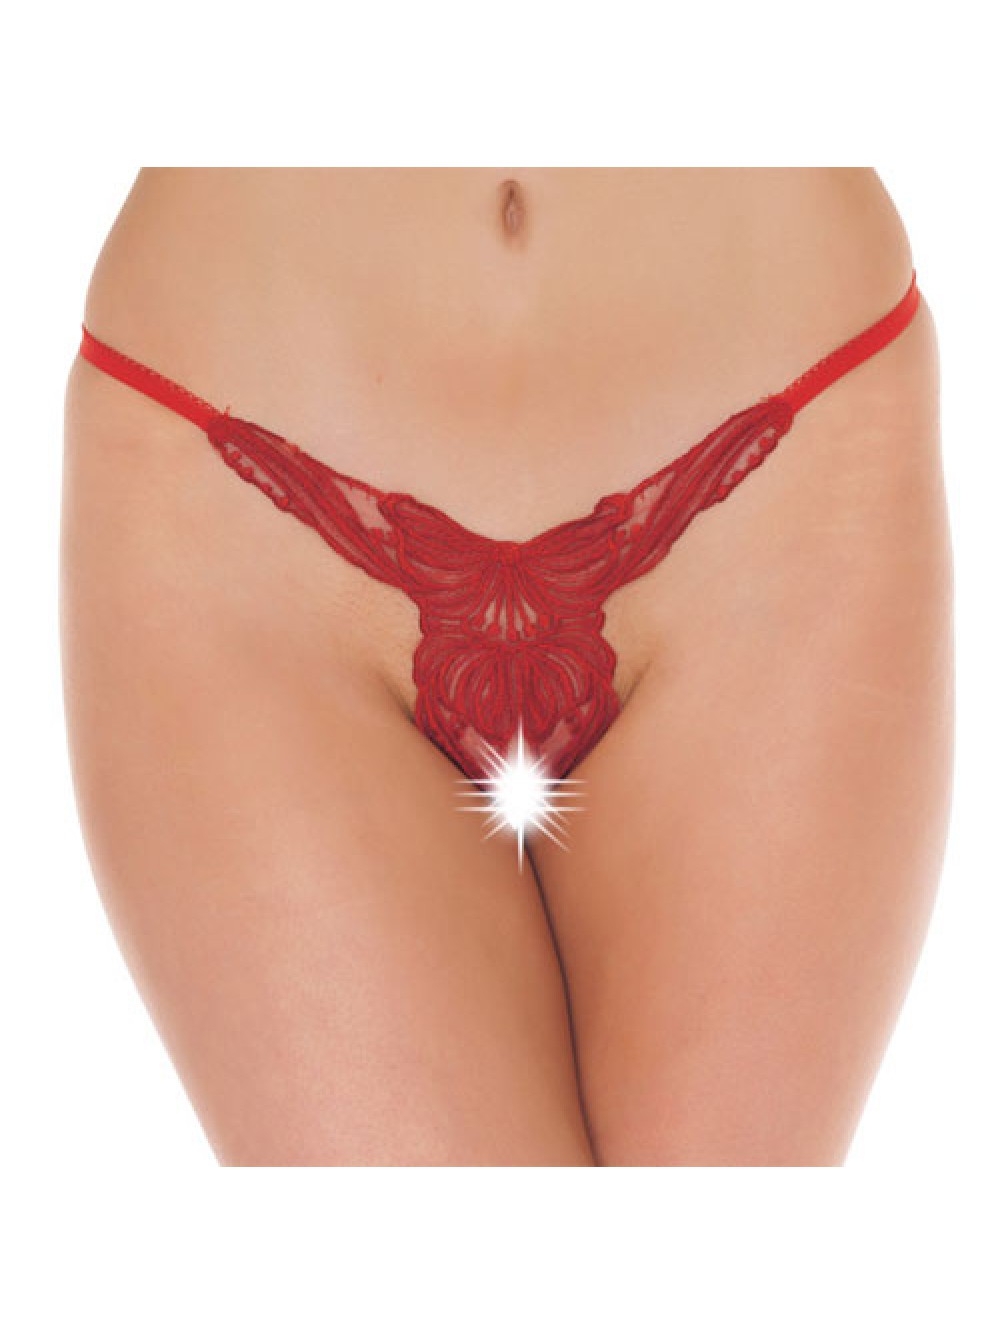 Red Crotchless G-String